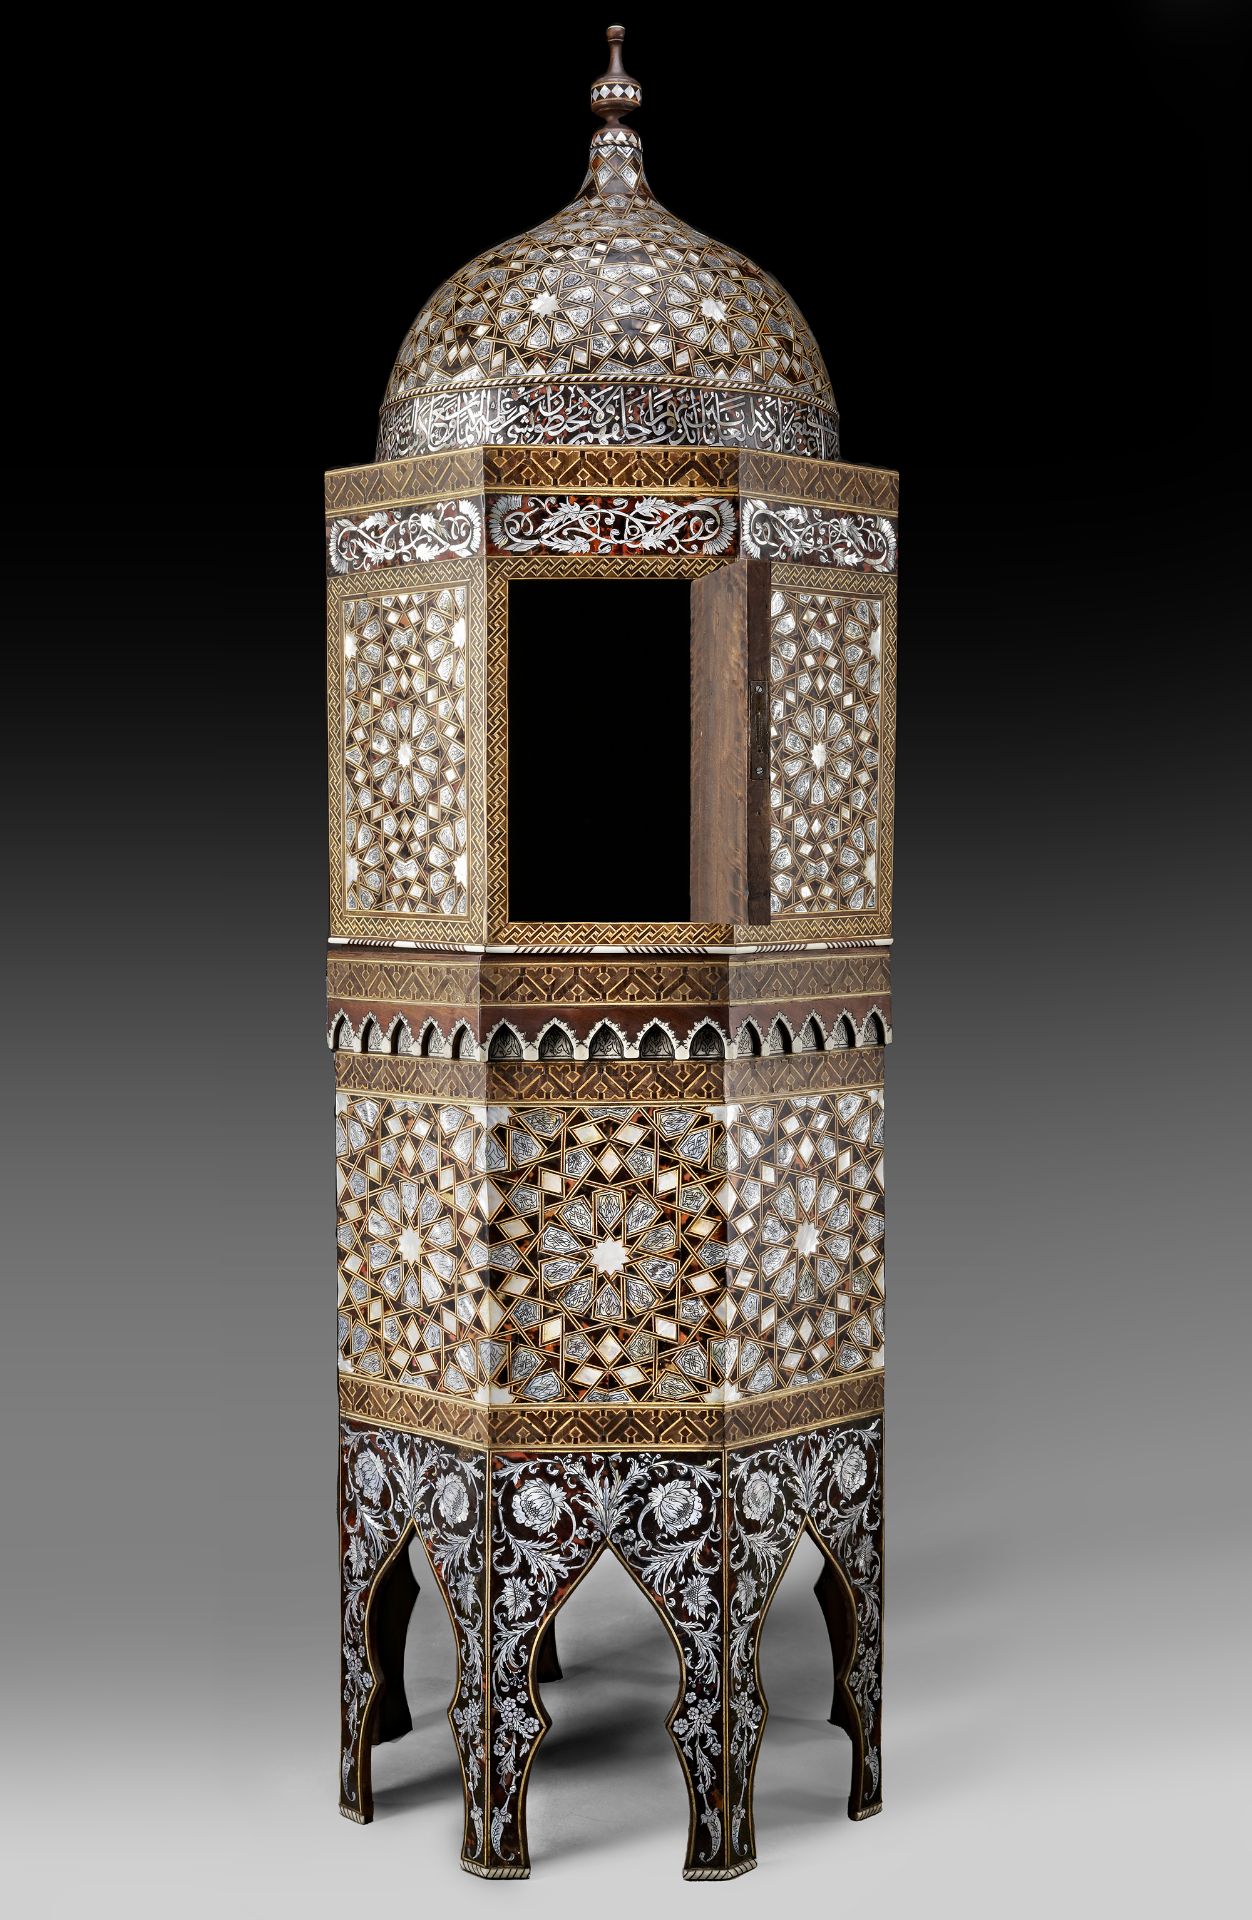 A TORTOISESHELL AND MOTHER-OF-PEARL OCTAGONAL CABINET, TURKEY OR SYRIA, EARLY 20TH CENTURY - Image 6 of 10